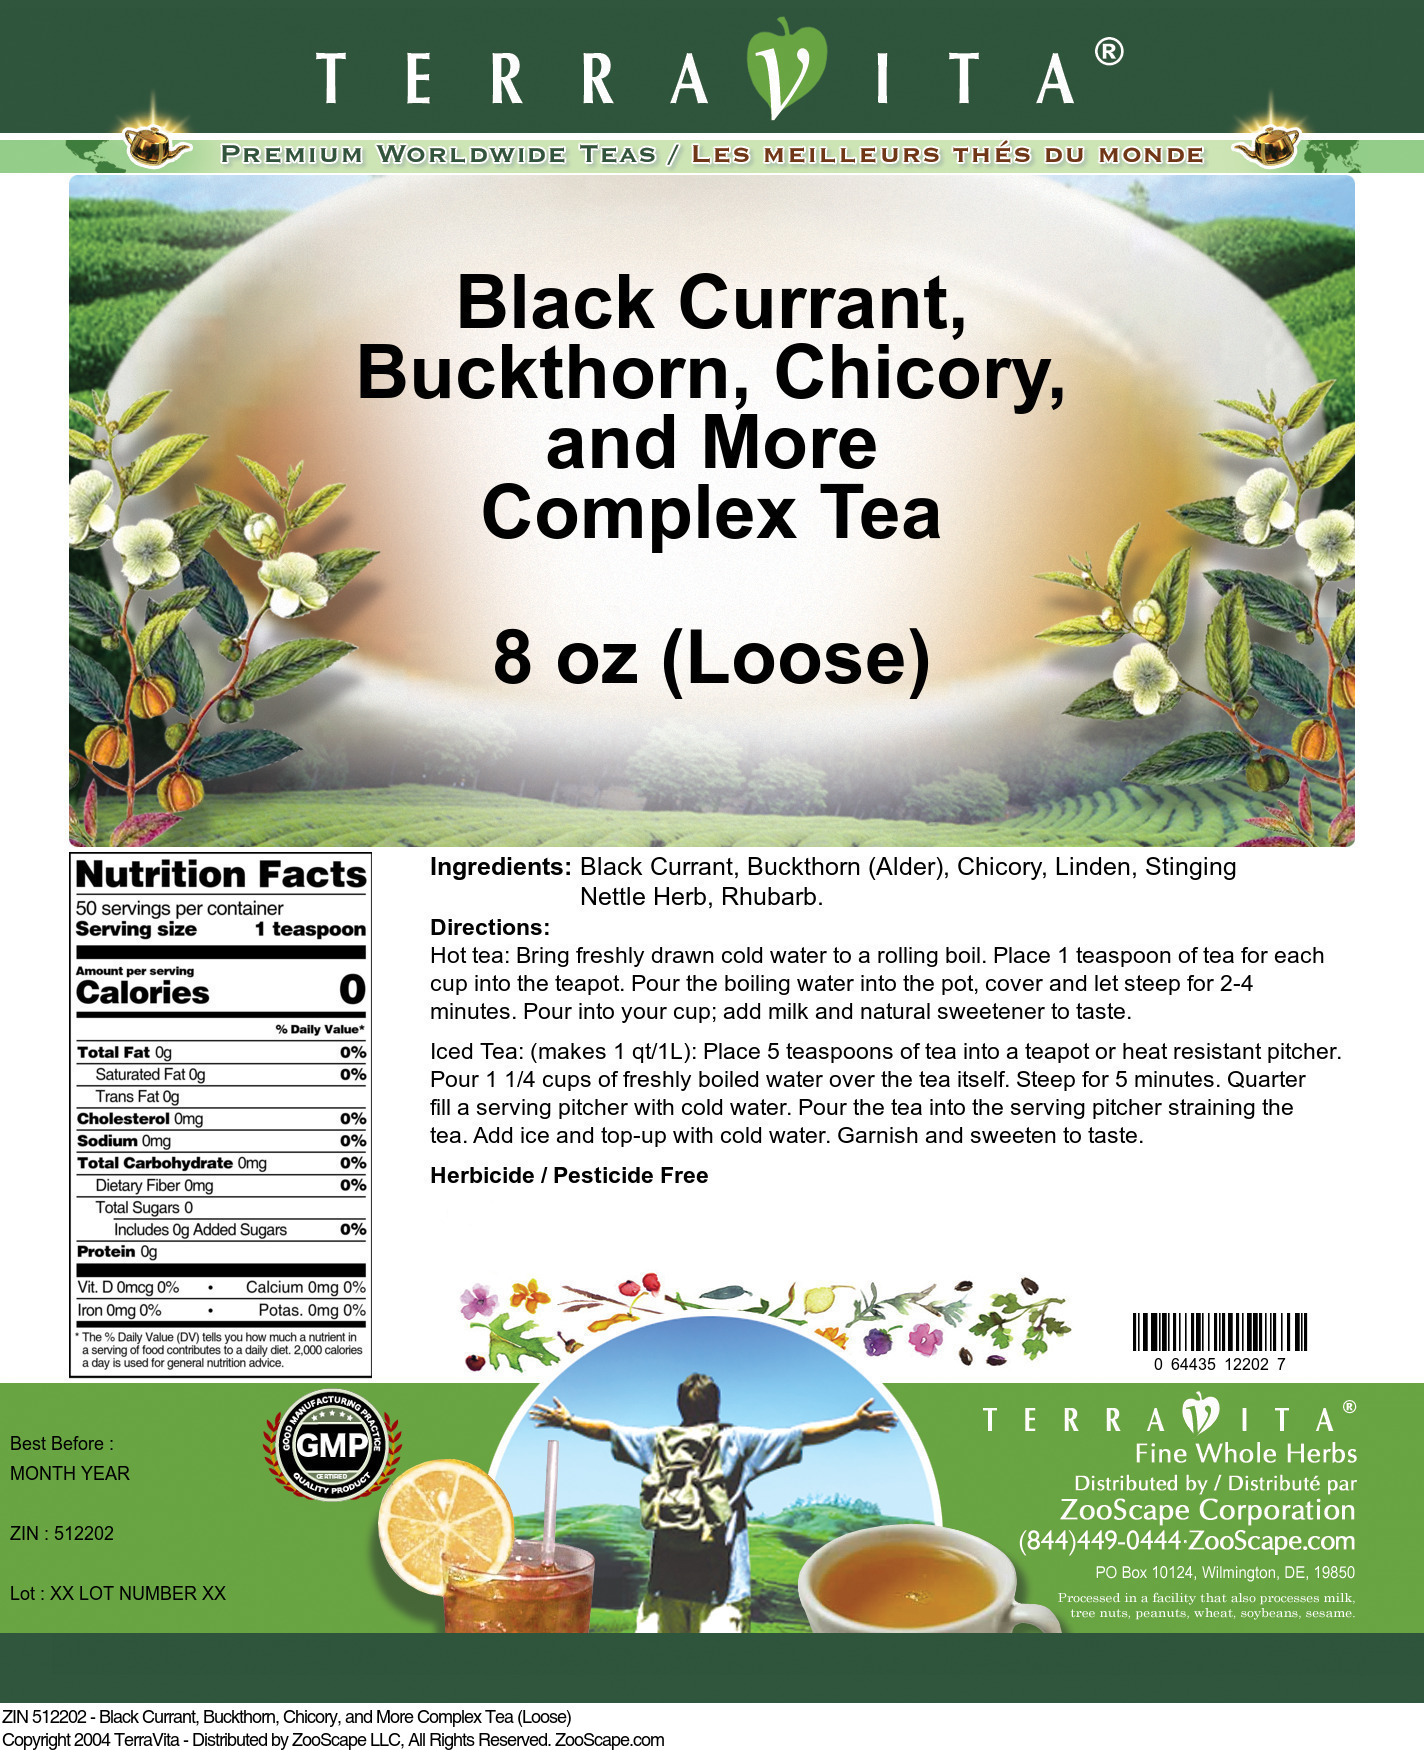 Black Currant, Buckthorn, Chicory, and More Complex Tea (Loose) - Label